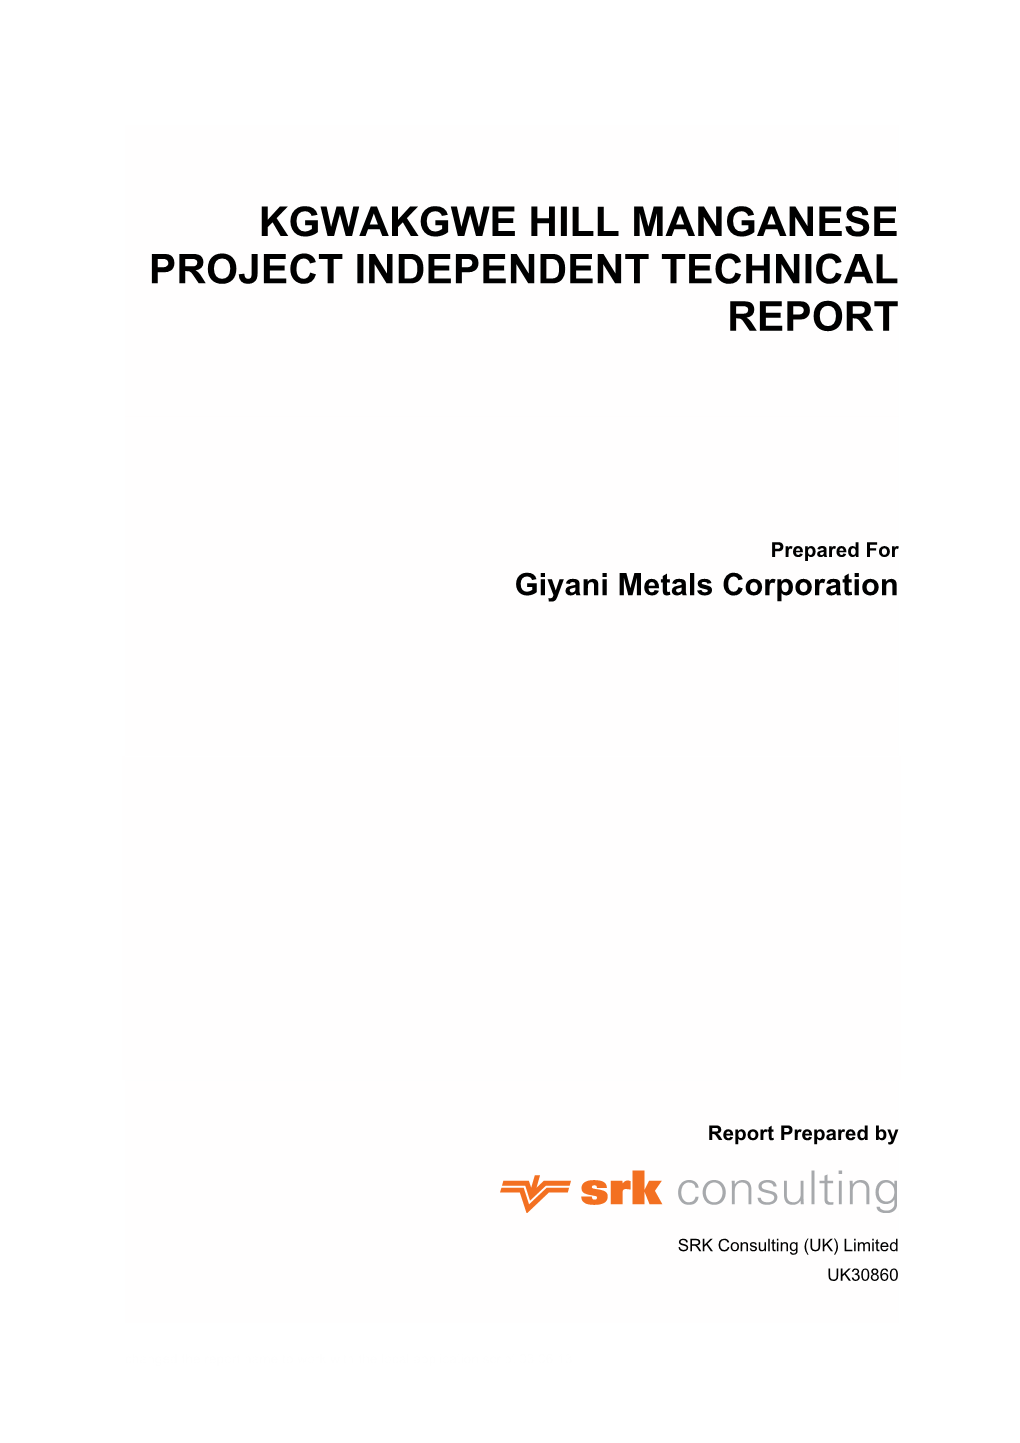 Kgwakgwe Hill Manganese Project Independent Technical Report